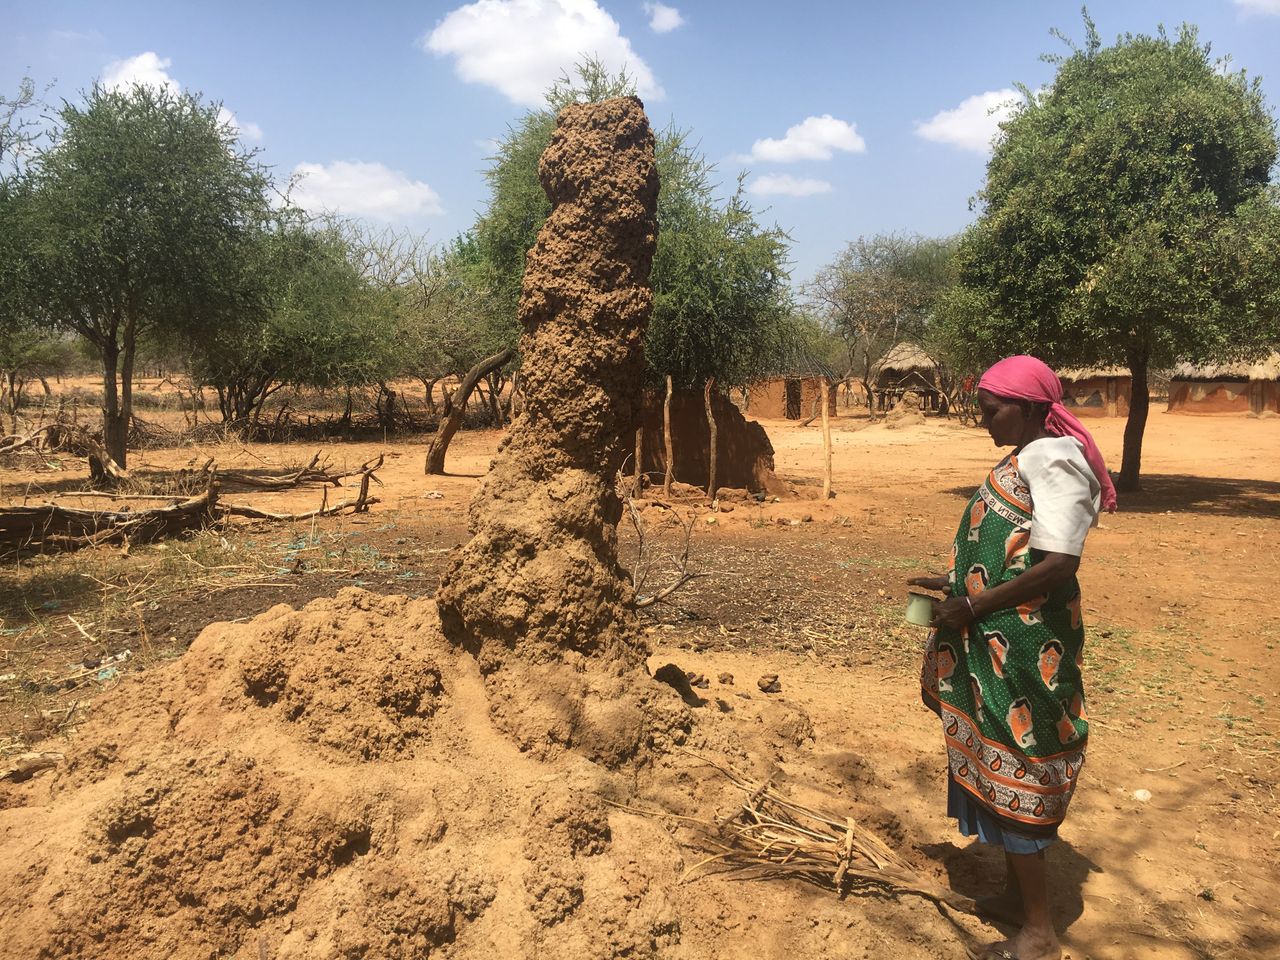 Selina Chepserum nearly lost her sight to trachoma several years ago. Here, she stands in front of a termite mound, ready to harvest insects for food.